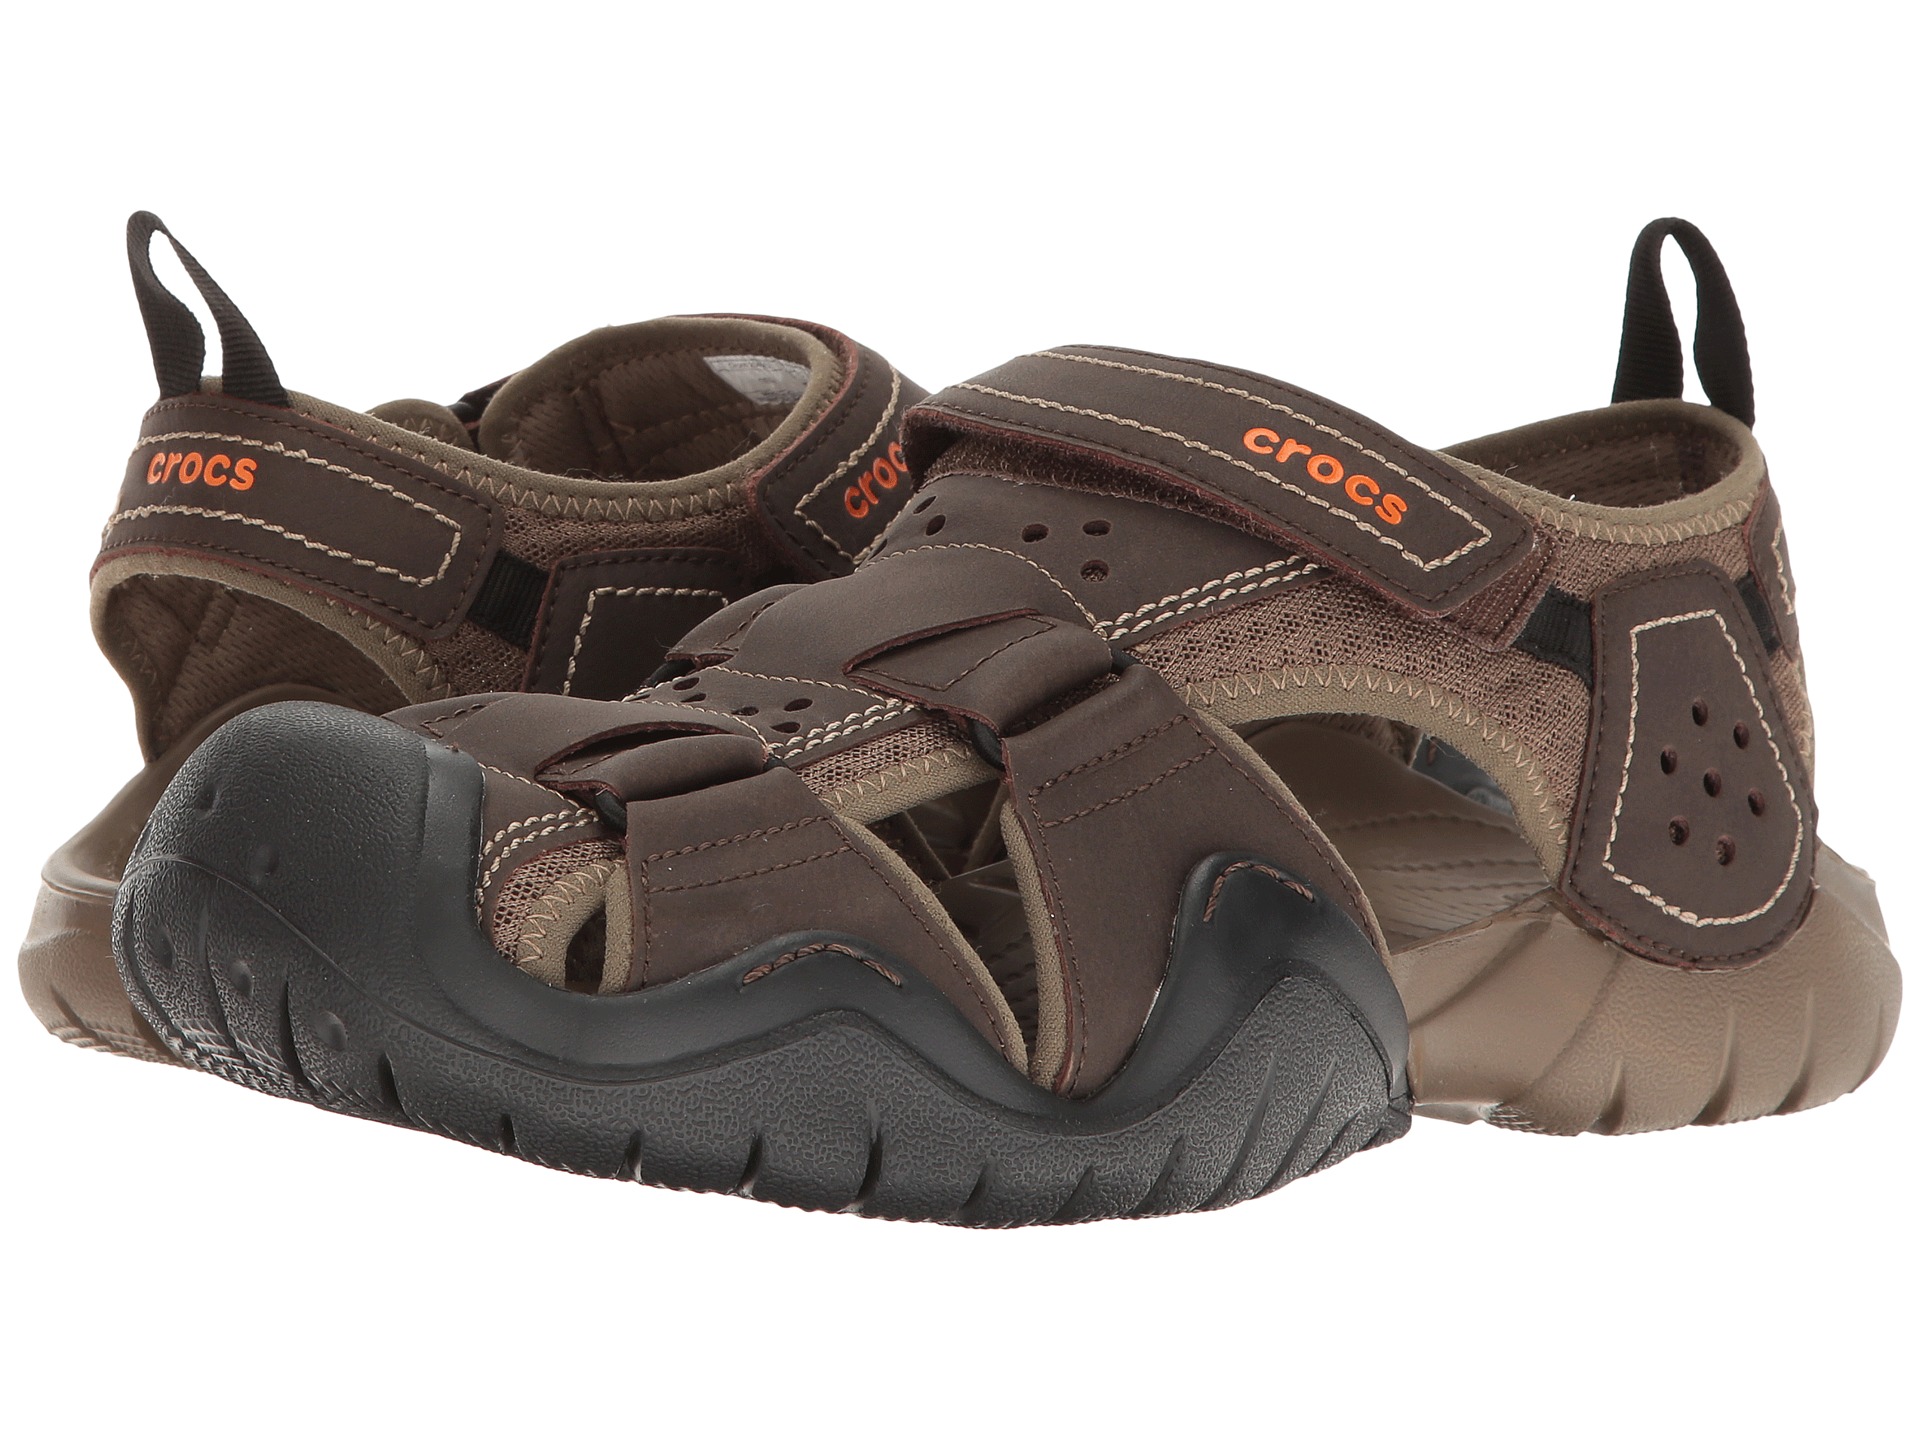 Crocs Swiftwater Leather Fisherman at Zappos.com